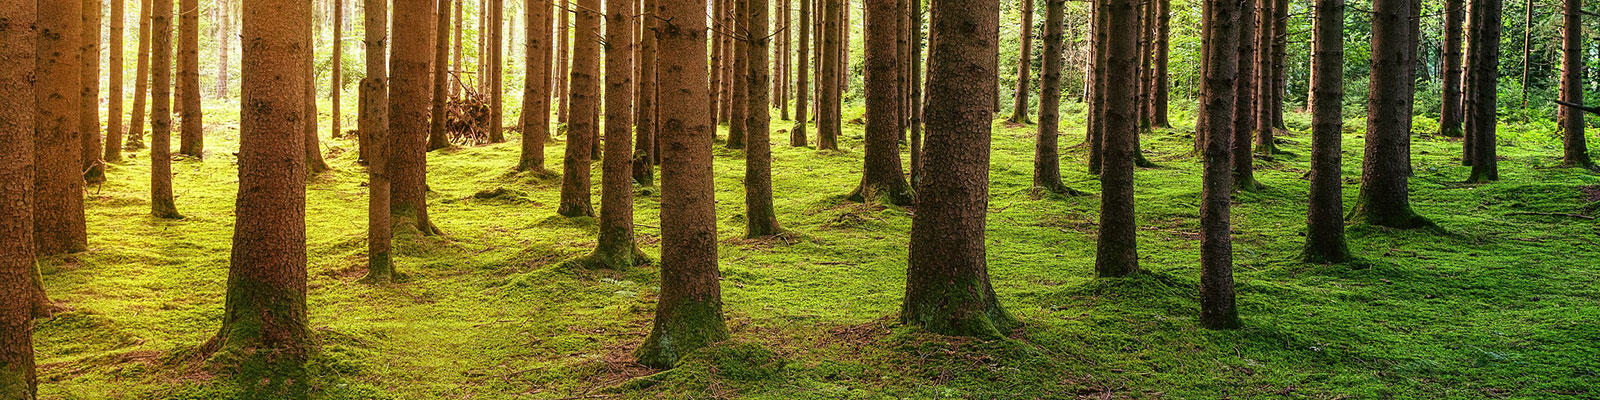 Grove of trees in a forest